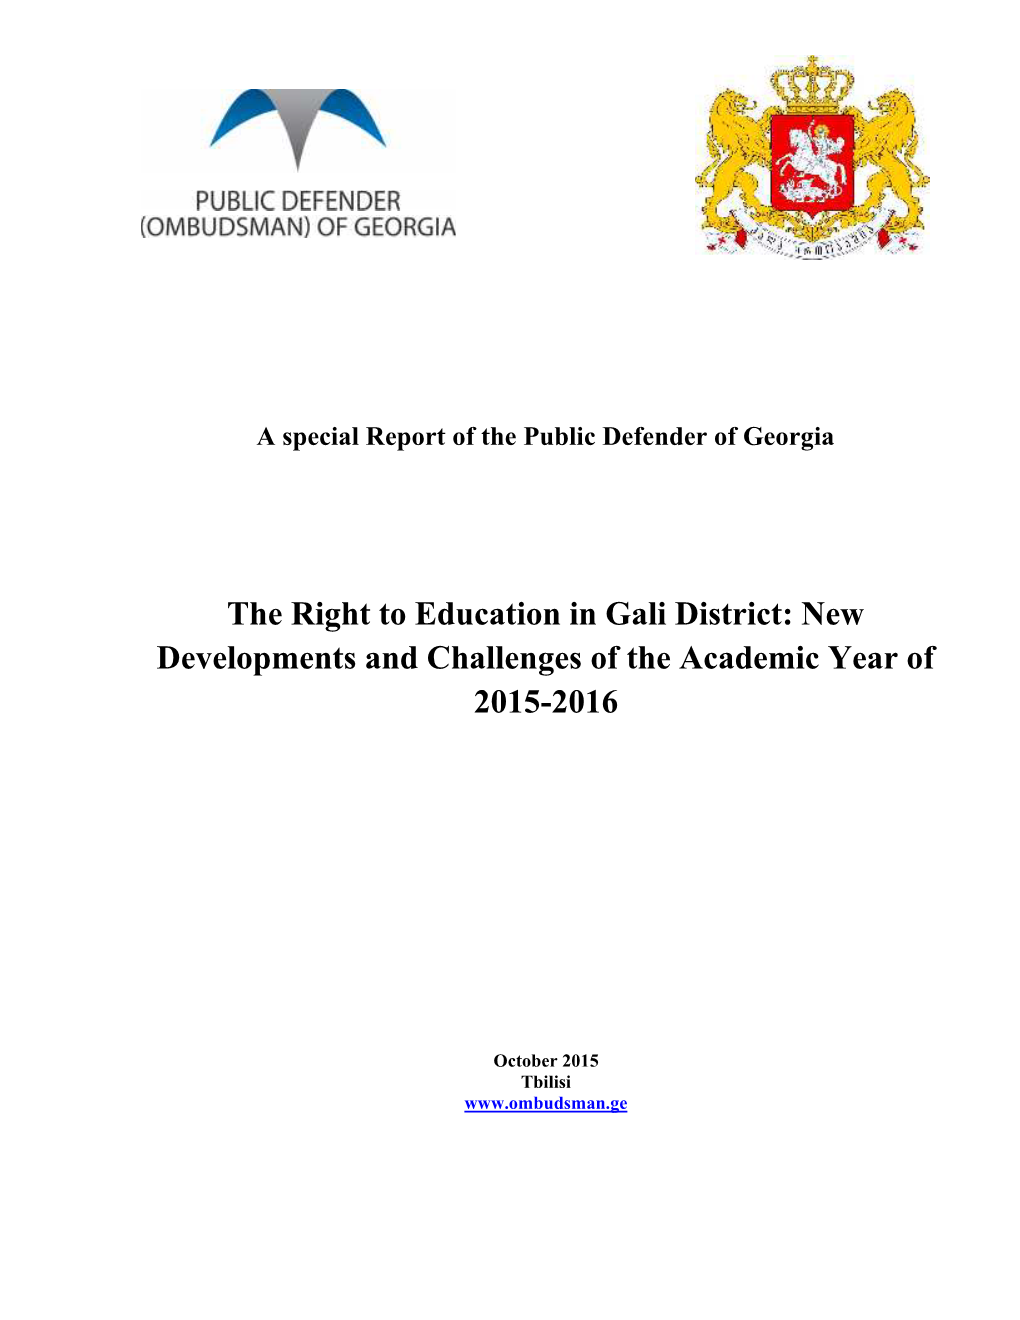 The Right to Education in Gali District: New Developments and Challenges of the Academic Year of 2015-2016